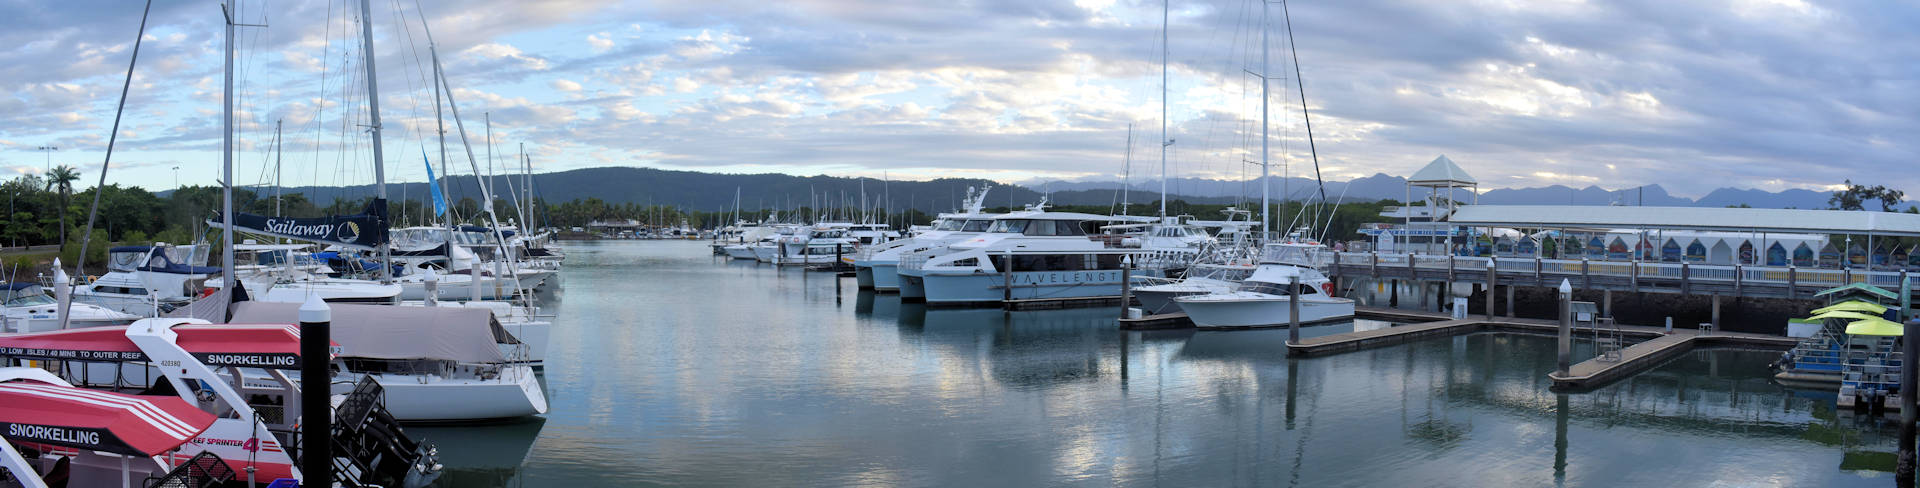 Looking over the marina at Port Douglas from Hemingway's Brewery